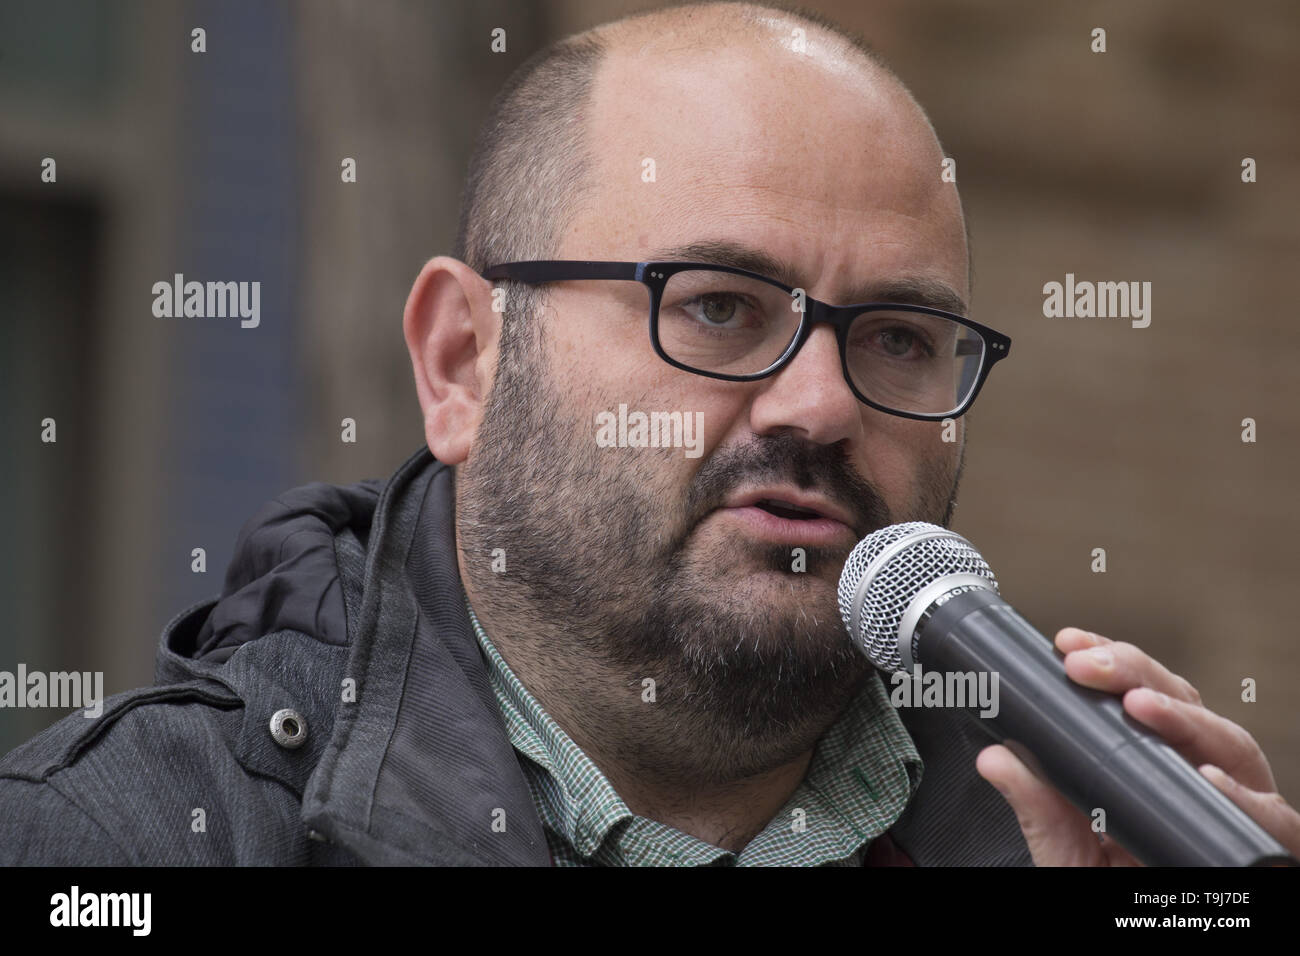 Madrid, Spain. 19th May, 2019. Pablo Carmona, number 3 in the lists of Madrid in Standing, seen saying, '' we must think of a vote that stops the right next to a political program of shock against the measures of the right.'' during the party conference.The political coalition Madrid en Pie holds a Party conference with the participation of Carlos SÃ¡nchez Mato, candidate for mayor of the city of Madrid, Rommy Arce, number 2 on the lists of Madrid en Pie, and Pablo Carmona, number 3 on the Madrid lists standing. The still councilors in the City council of Madrid of Ahora Madrid will concur th Stock Photo